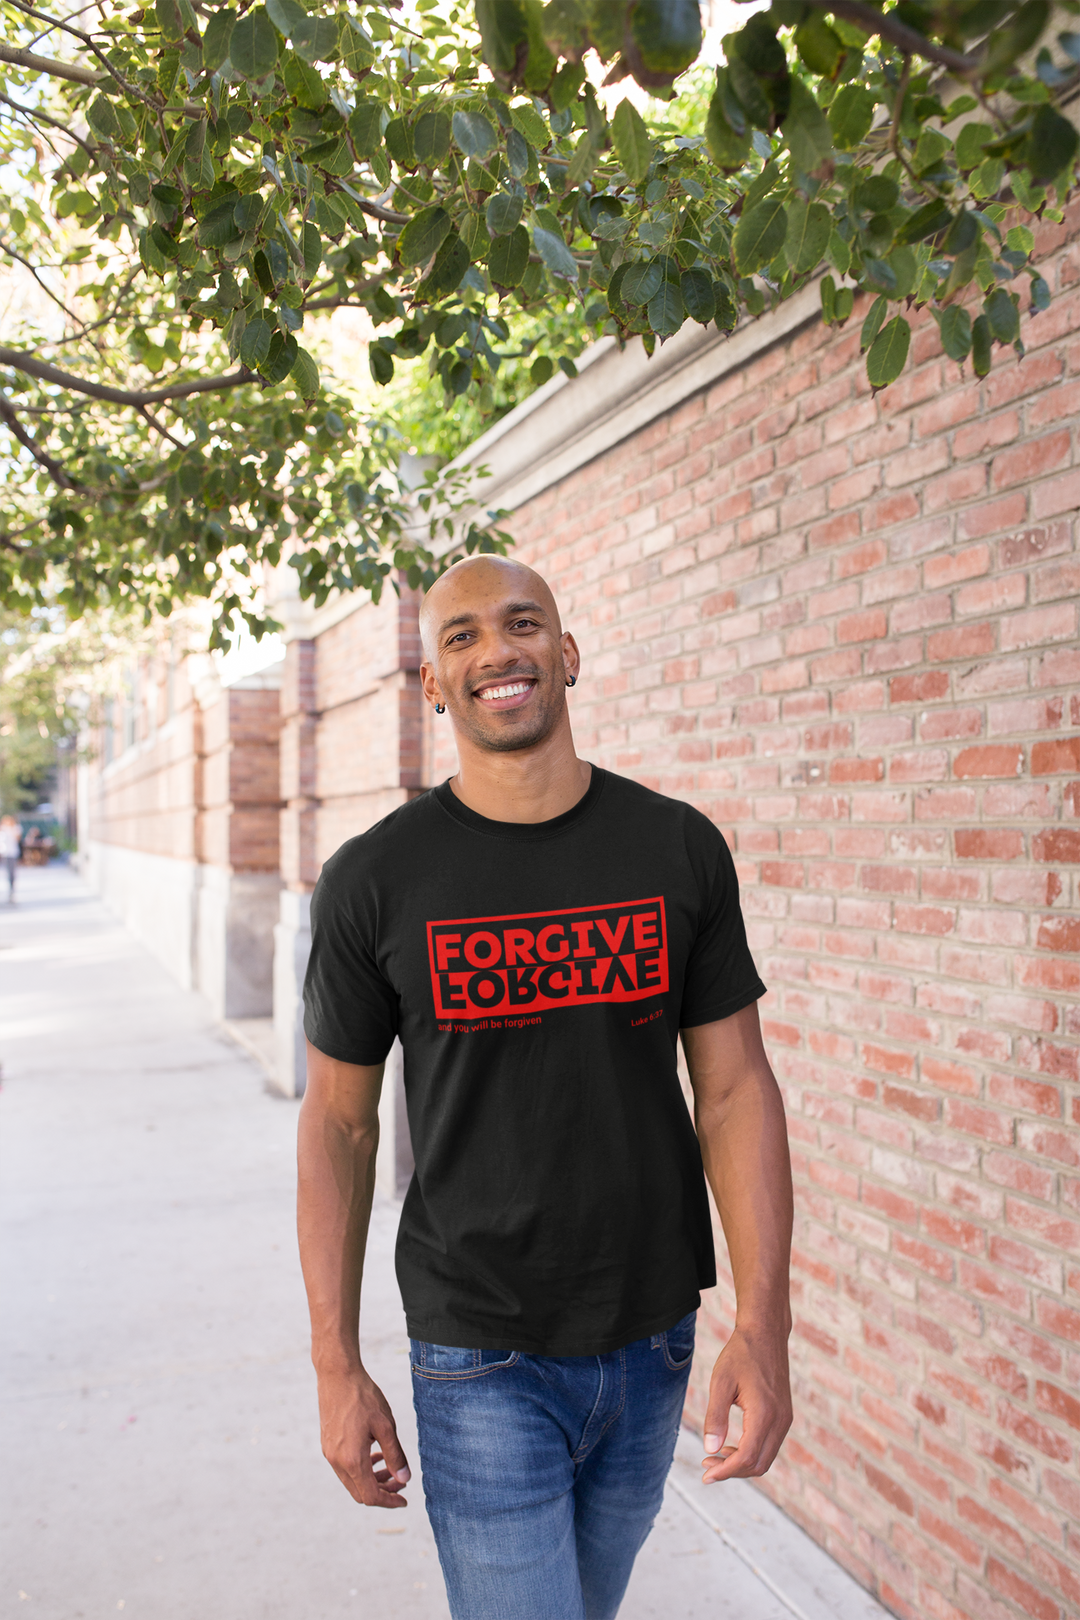 Forgive and You will be Forgiven Men's Tee